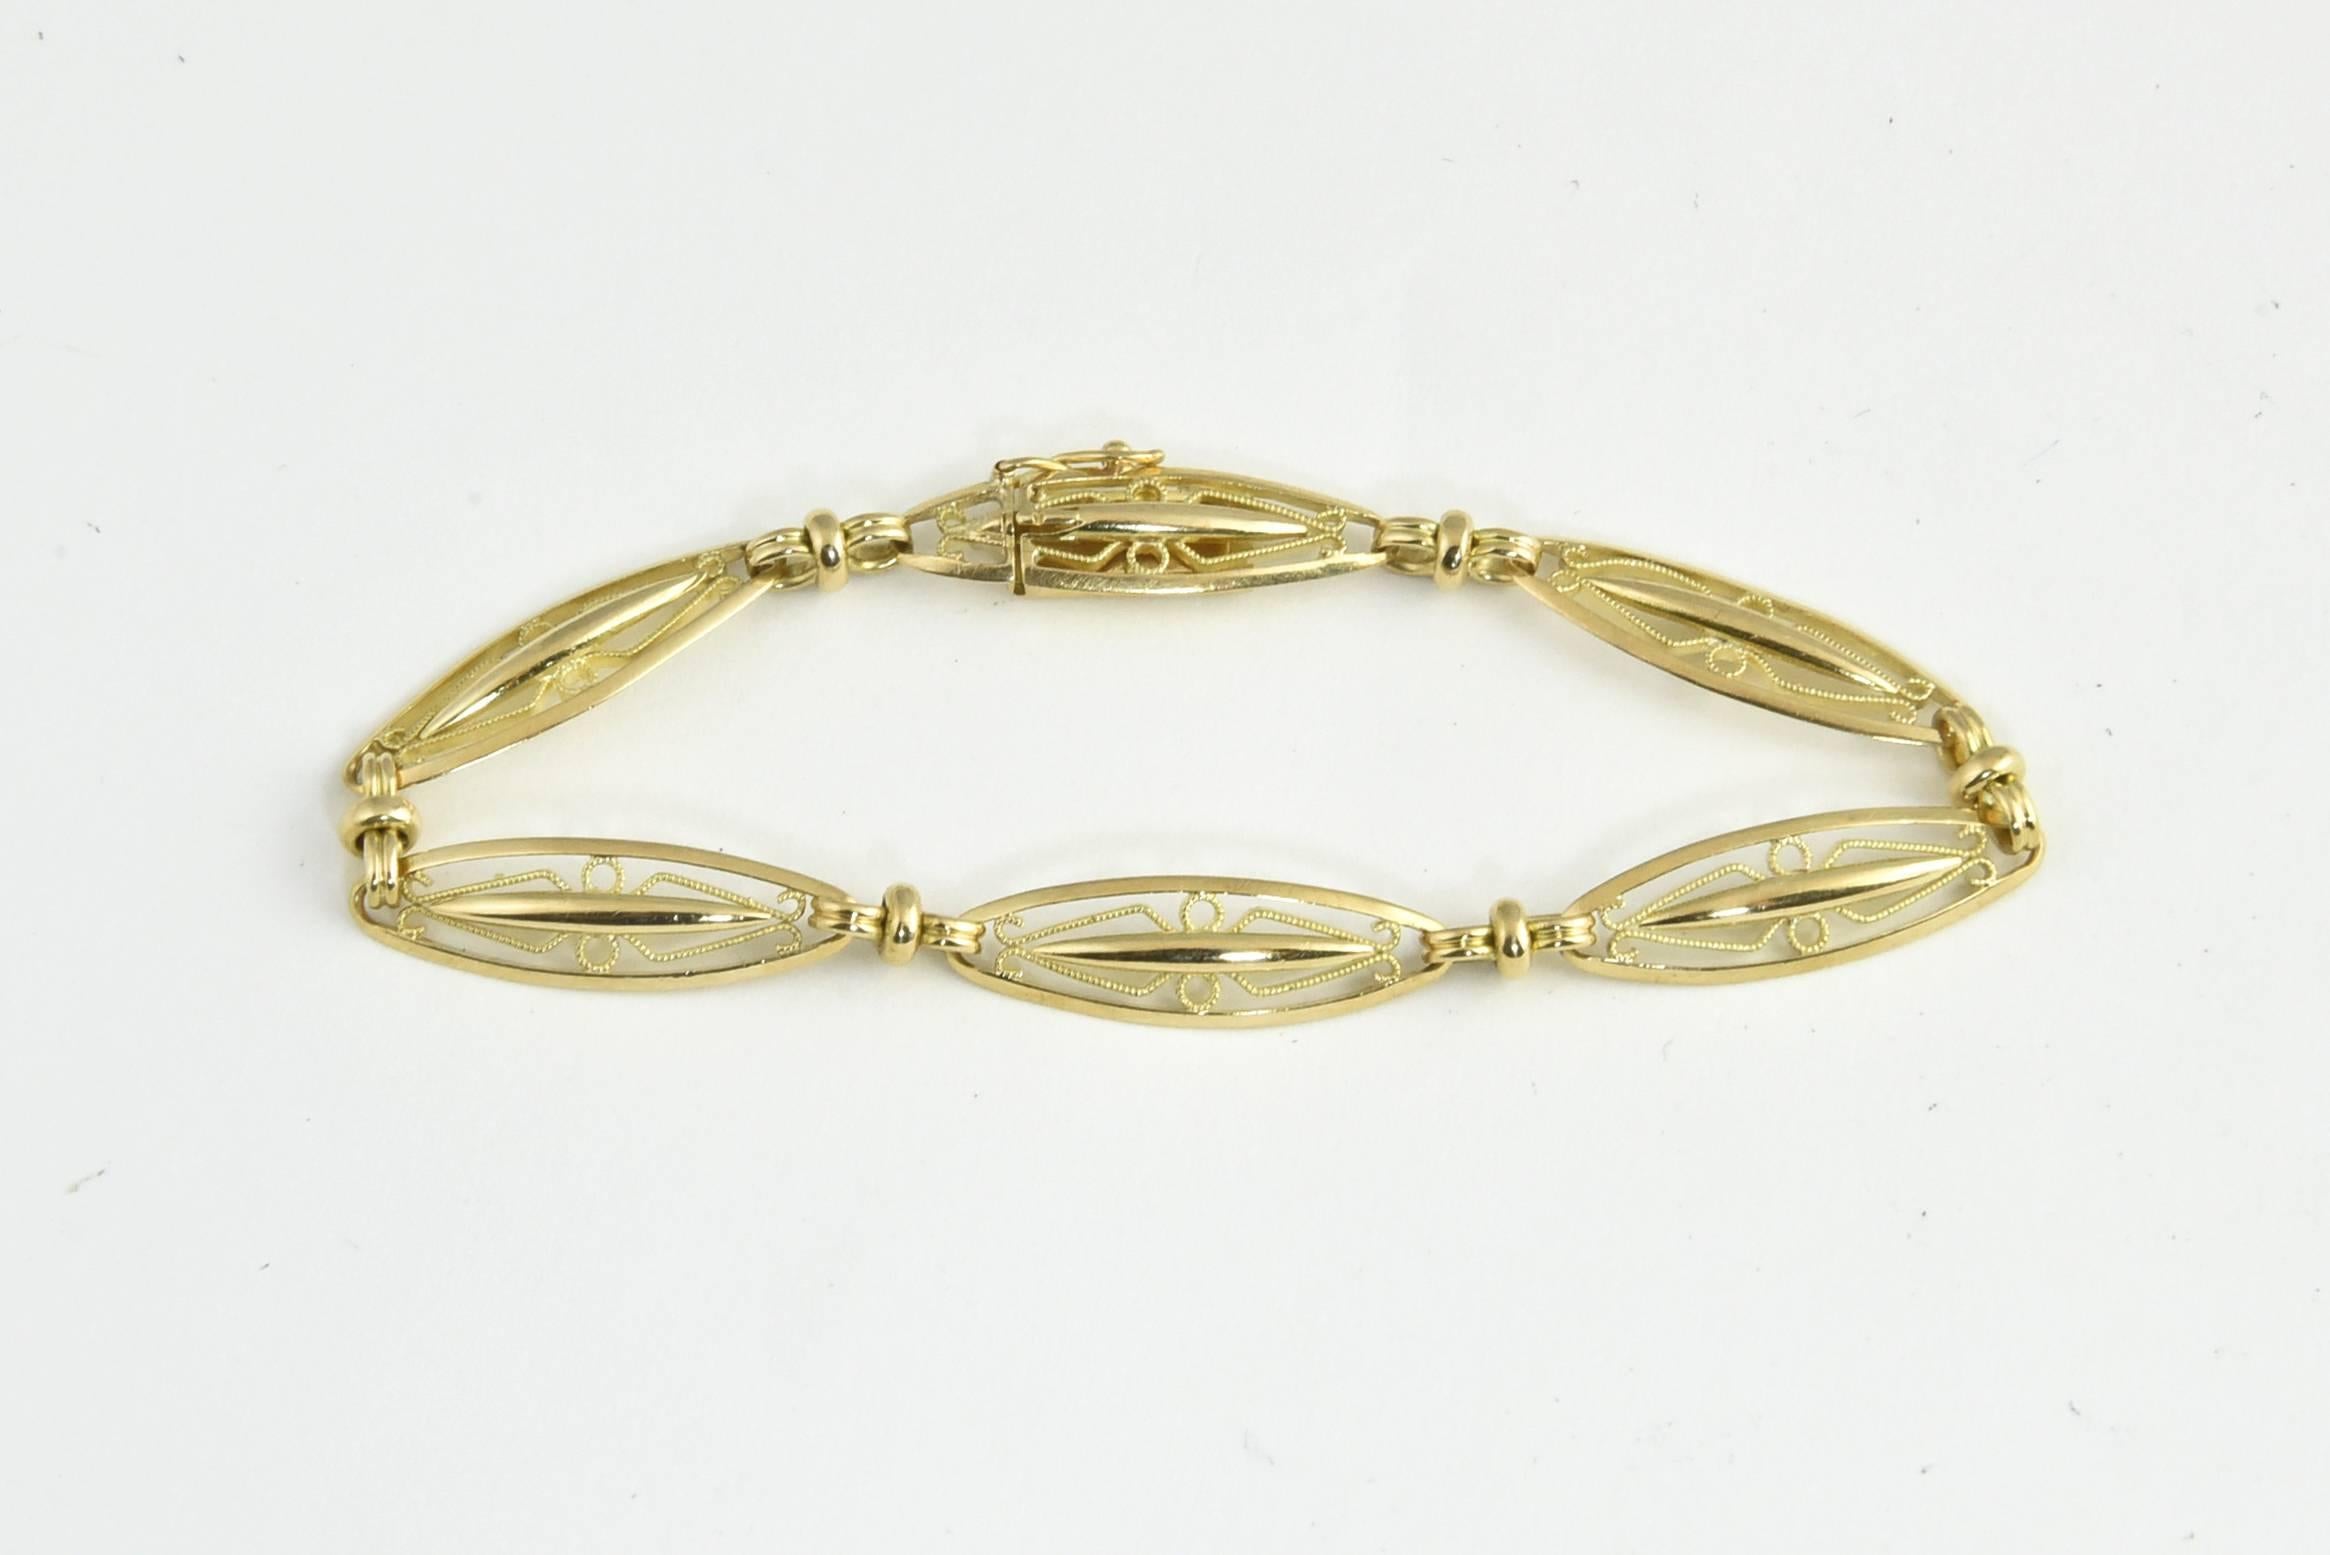 Gay Frères made this beautiful 18k gold bracelet during the Art Deco Era (Circa 1920's).   It features intricate handmade repeating open work navettes each connected by a chain link.  

Created in 1835, the workshop was dedicated to the